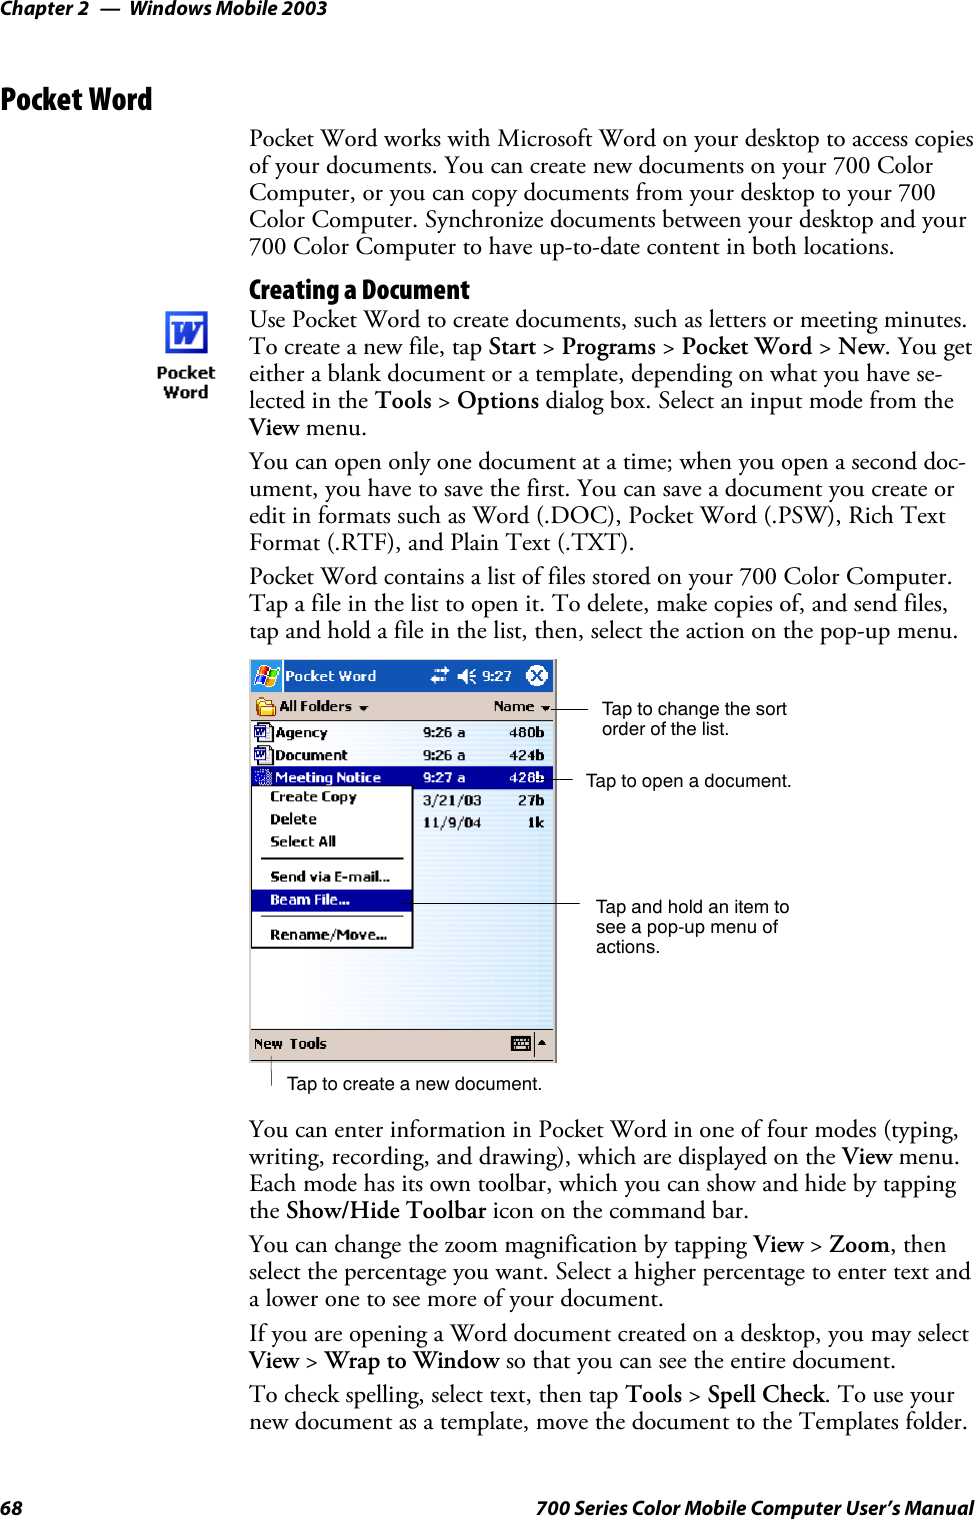 Windows Mobile 2003Chapter —268 700 Series Color Mobile Computer User’s ManualPocket WordPocket Word works with Microsoft Word on your desktop to access copiesof your documents. You can create new documents on your 700 ColorComputer, or you can copy documents from your desktop to your 700Color Computer. Synchronize documents between your desktop and your700 Color Computer to have up-to-date content in both locations.Creating a DocumentUse Pocket Word to create documents, such as letters or meeting minutes.To create a new file, tap Start &gt;Programs &gt;Pocket Word &gt;New. You geteither a blank document or a template, depending on what you have se-lected in the Tools &gt;Options dialog box. Select an input mode from theView menu.You can open only one document at a time; when you open a second doc-ument, you have to save the first. You can save a document you create oredit in formats such as Word (.DOC), Pocket Word (.PSW), Rich TextFormat (.RTF), and Plain Text (.TXT).Pocket Word contains a list of files stored on your 700 Color Computer.Tap a file in the list to open it. To delete, make copies of, and send files,tap and hold a file in the list, then, select the action on the pop-up menu.Tap to change the sortorder of the list.Tap to create a new document.Tap to open a document.Tap and hold an item tosee a pop-up menu ofactions.You can enter information in Pocket Word in one of four modes (typing,writing, recording, and drawing), which are displayed on the View menu.Each mode has its own toolbar, which you can show and hide by tappingthe Show/Hide Toolbar icon on the command bar.You can change the zoom magnification by tapping View &gt;Zoom,thenselect the percentage you want. Select a higher percentage to enter text anda lower one to see more of your document.If you are opening a Word document created on a desktop, you may selectView &gt;Wrap to Window so that you can see the entire document.To check spelling, select text, then tap Tools &gt;Spell Check.Touseyournew document as a template, move the document to the Templates folder.